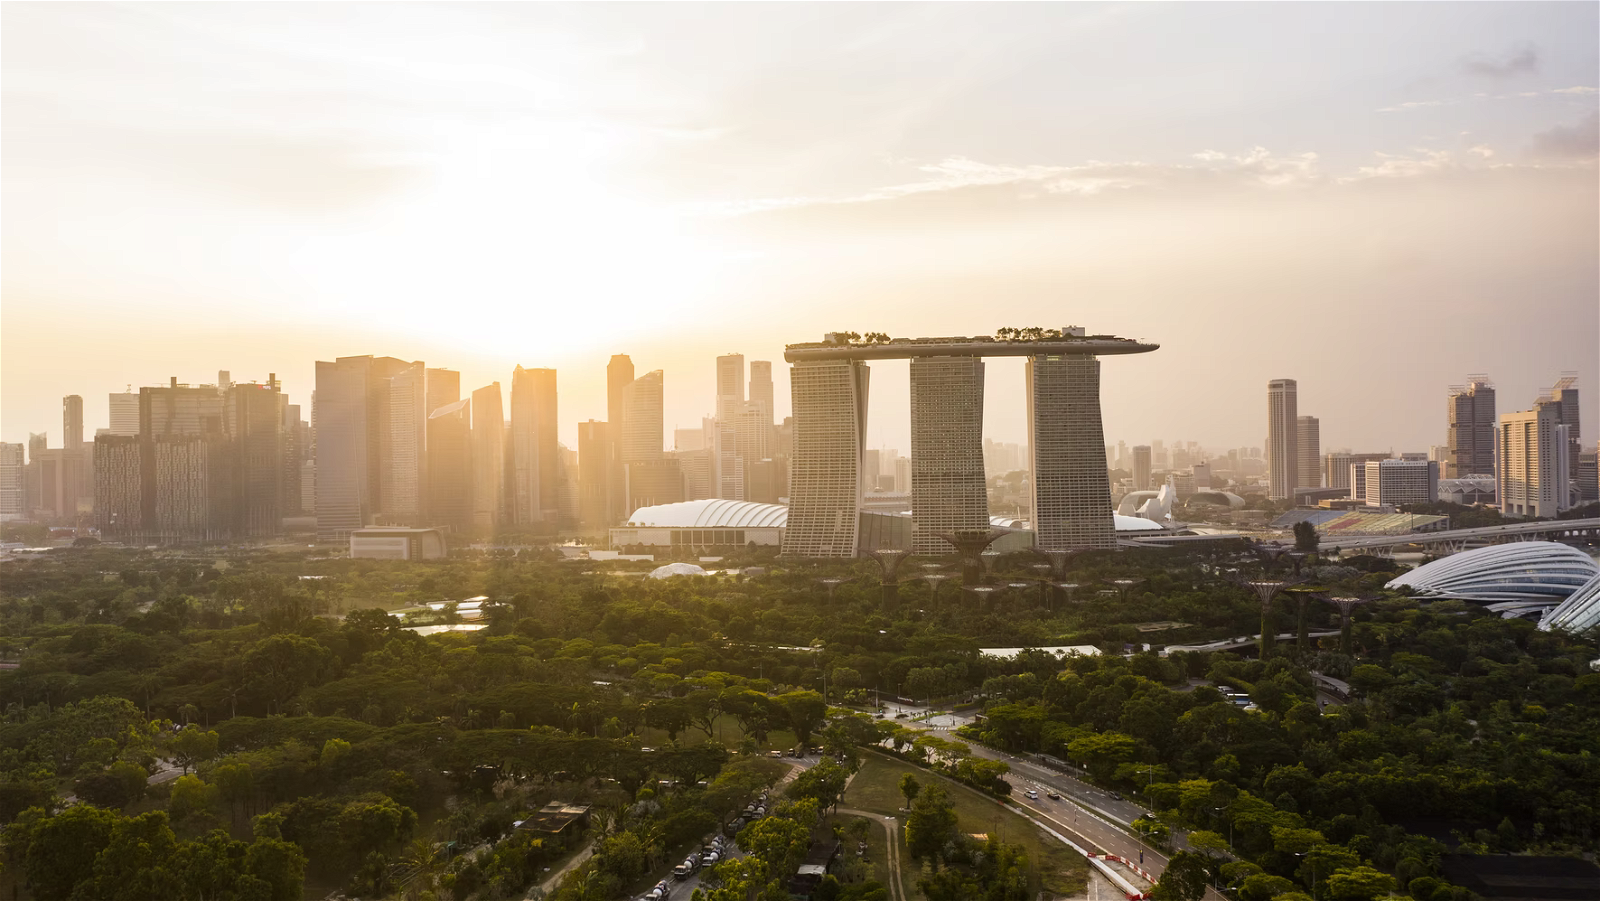 The lion roars for the planet: Singapore’s role in the fight against climate change